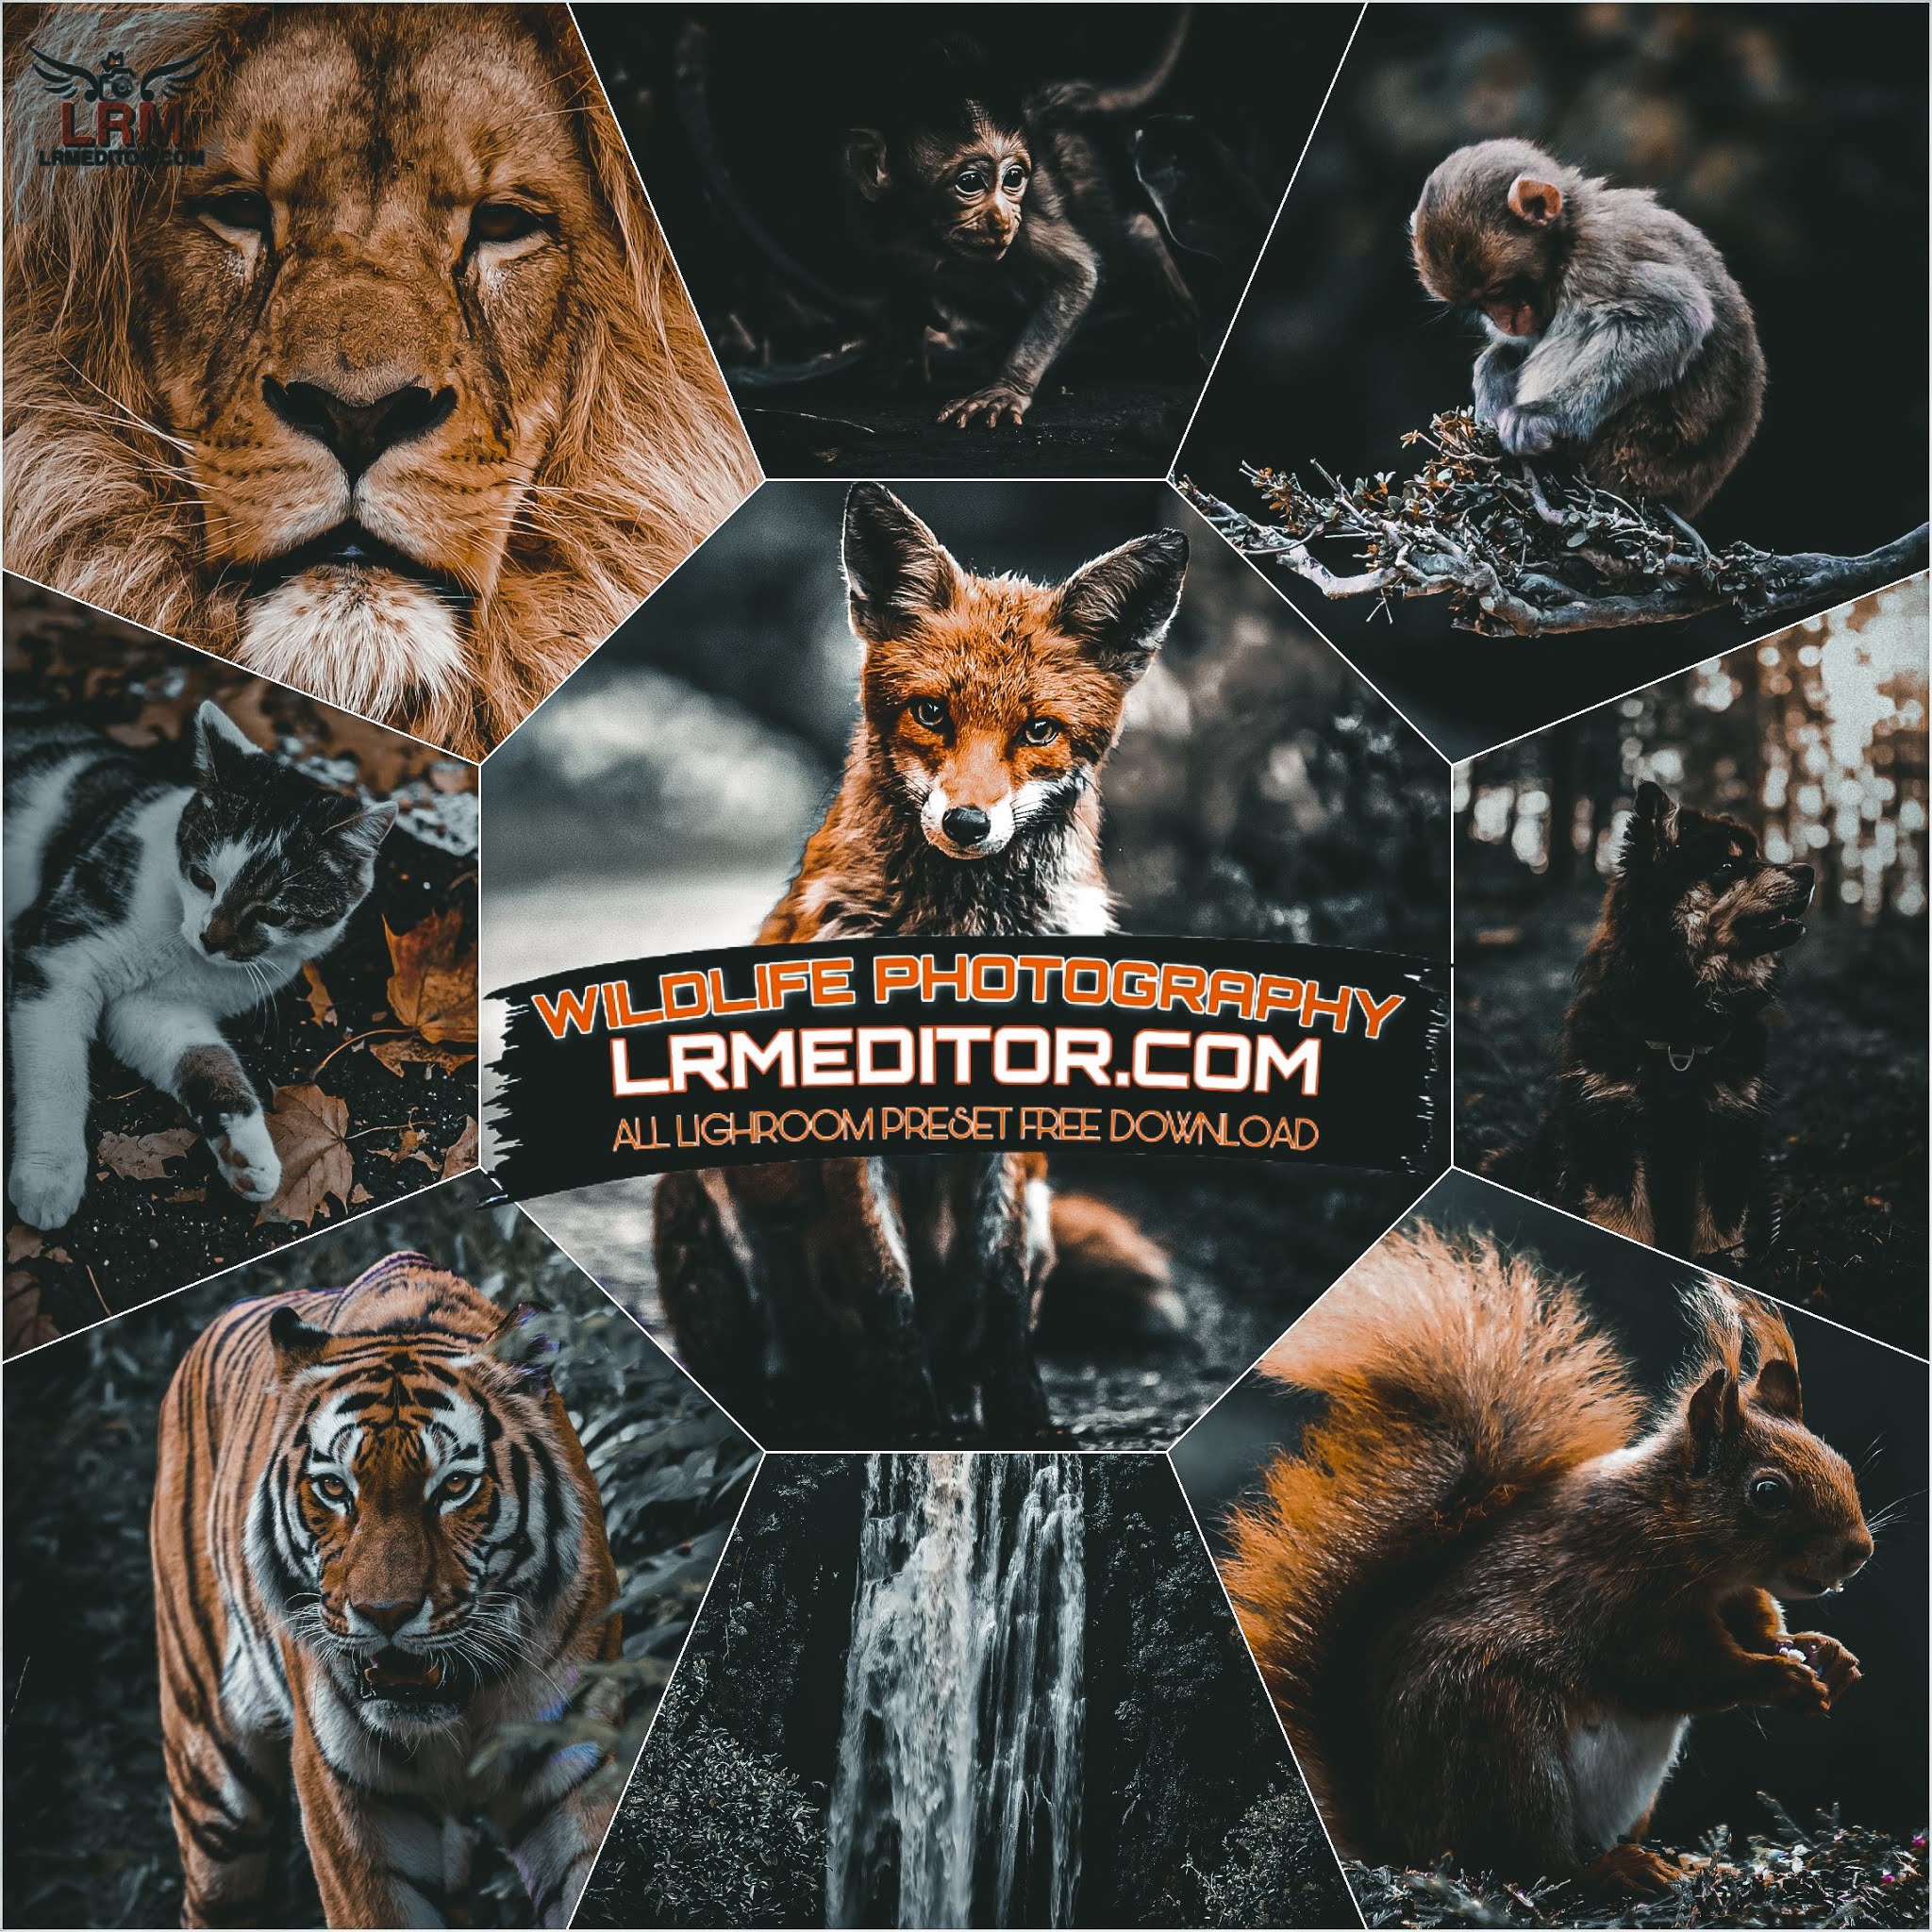 animal picture
wildlife picture
image animals, nature, trees, mountains, rivers, waterfalls, and wildlife
tiger photos wallpaper
cat 
best Lightroom presets free download
dng raw